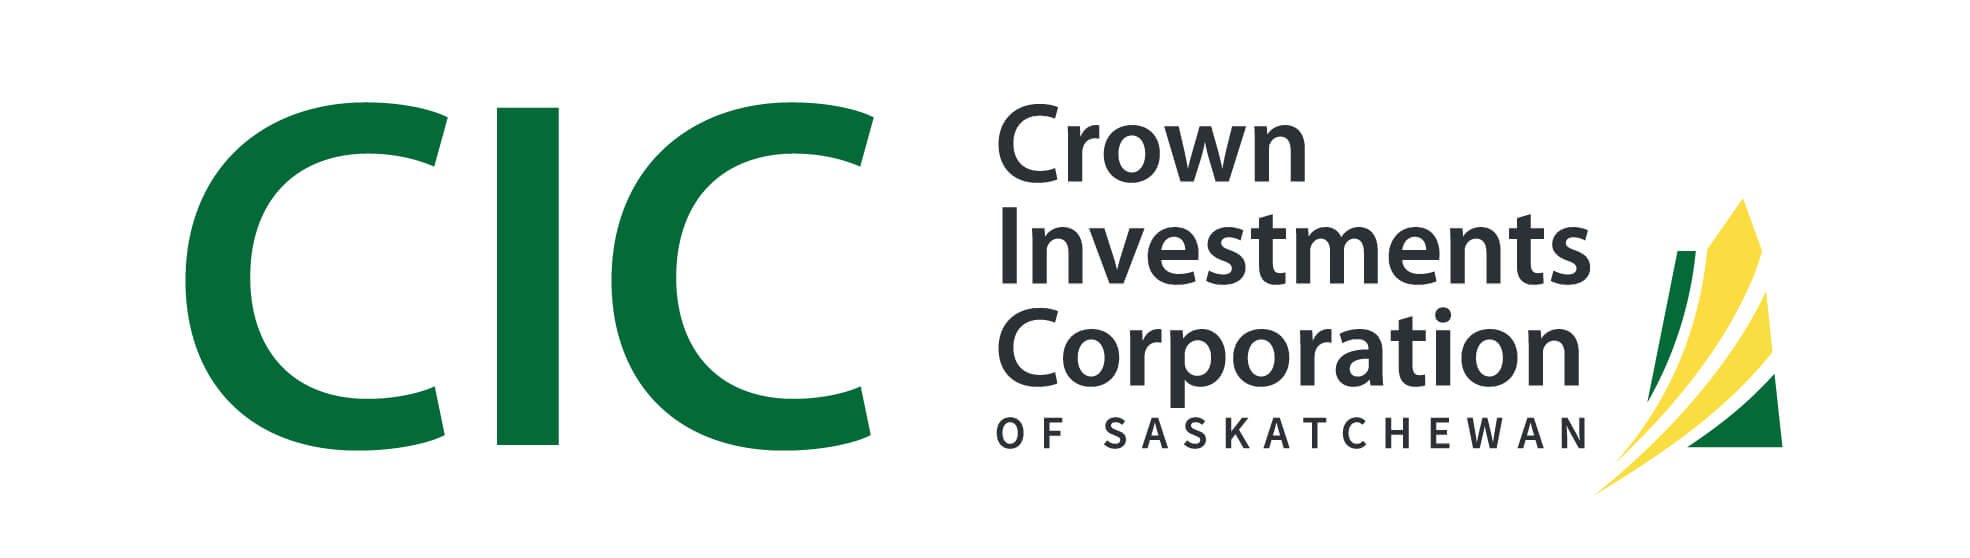 Crown Investments Corp.jpg